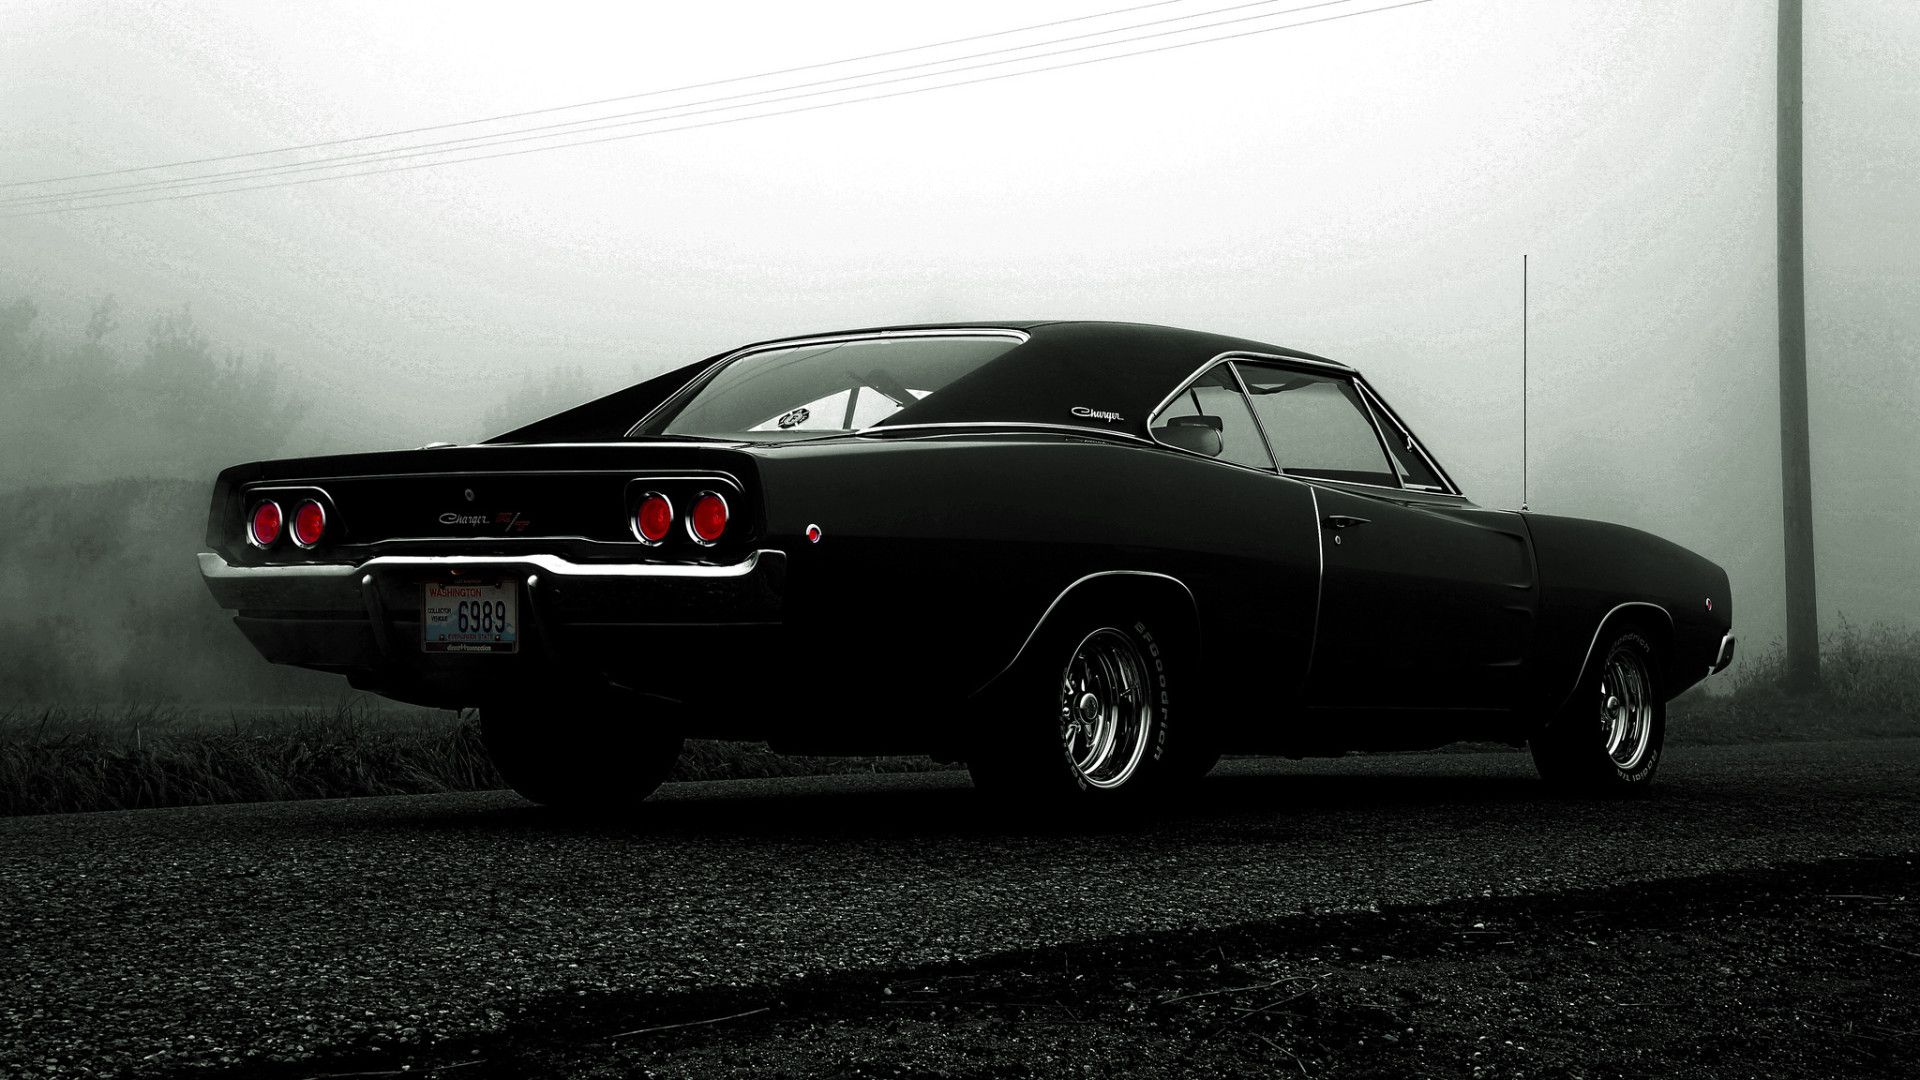 Charger On A Misty Morning Motor Envy Muscle